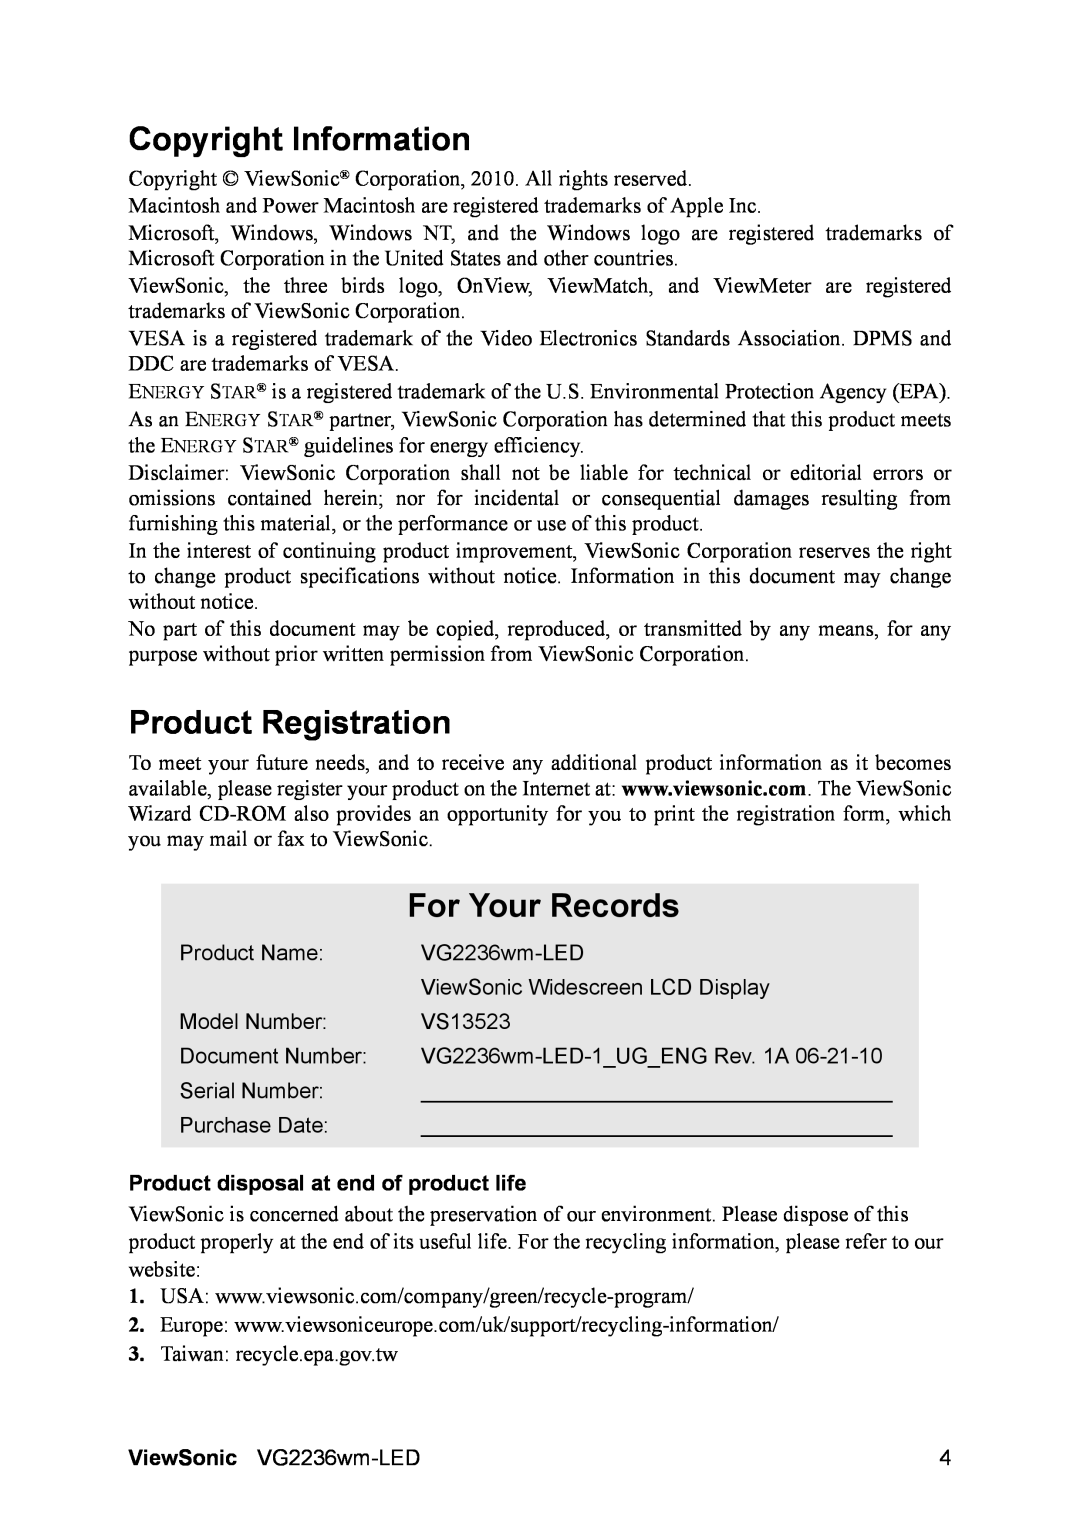 ViewSonic VG2236wm-LED warranty Copyright Information, Product Registration, For Your Records 